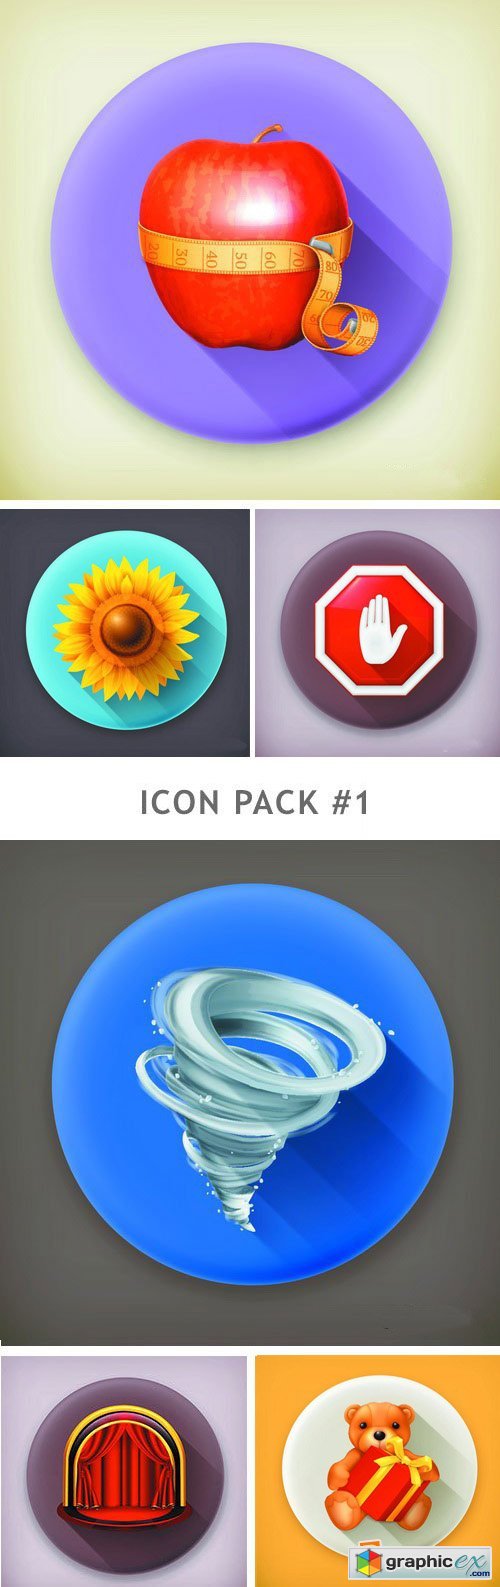 Icon Pack #1 - 25xEPS